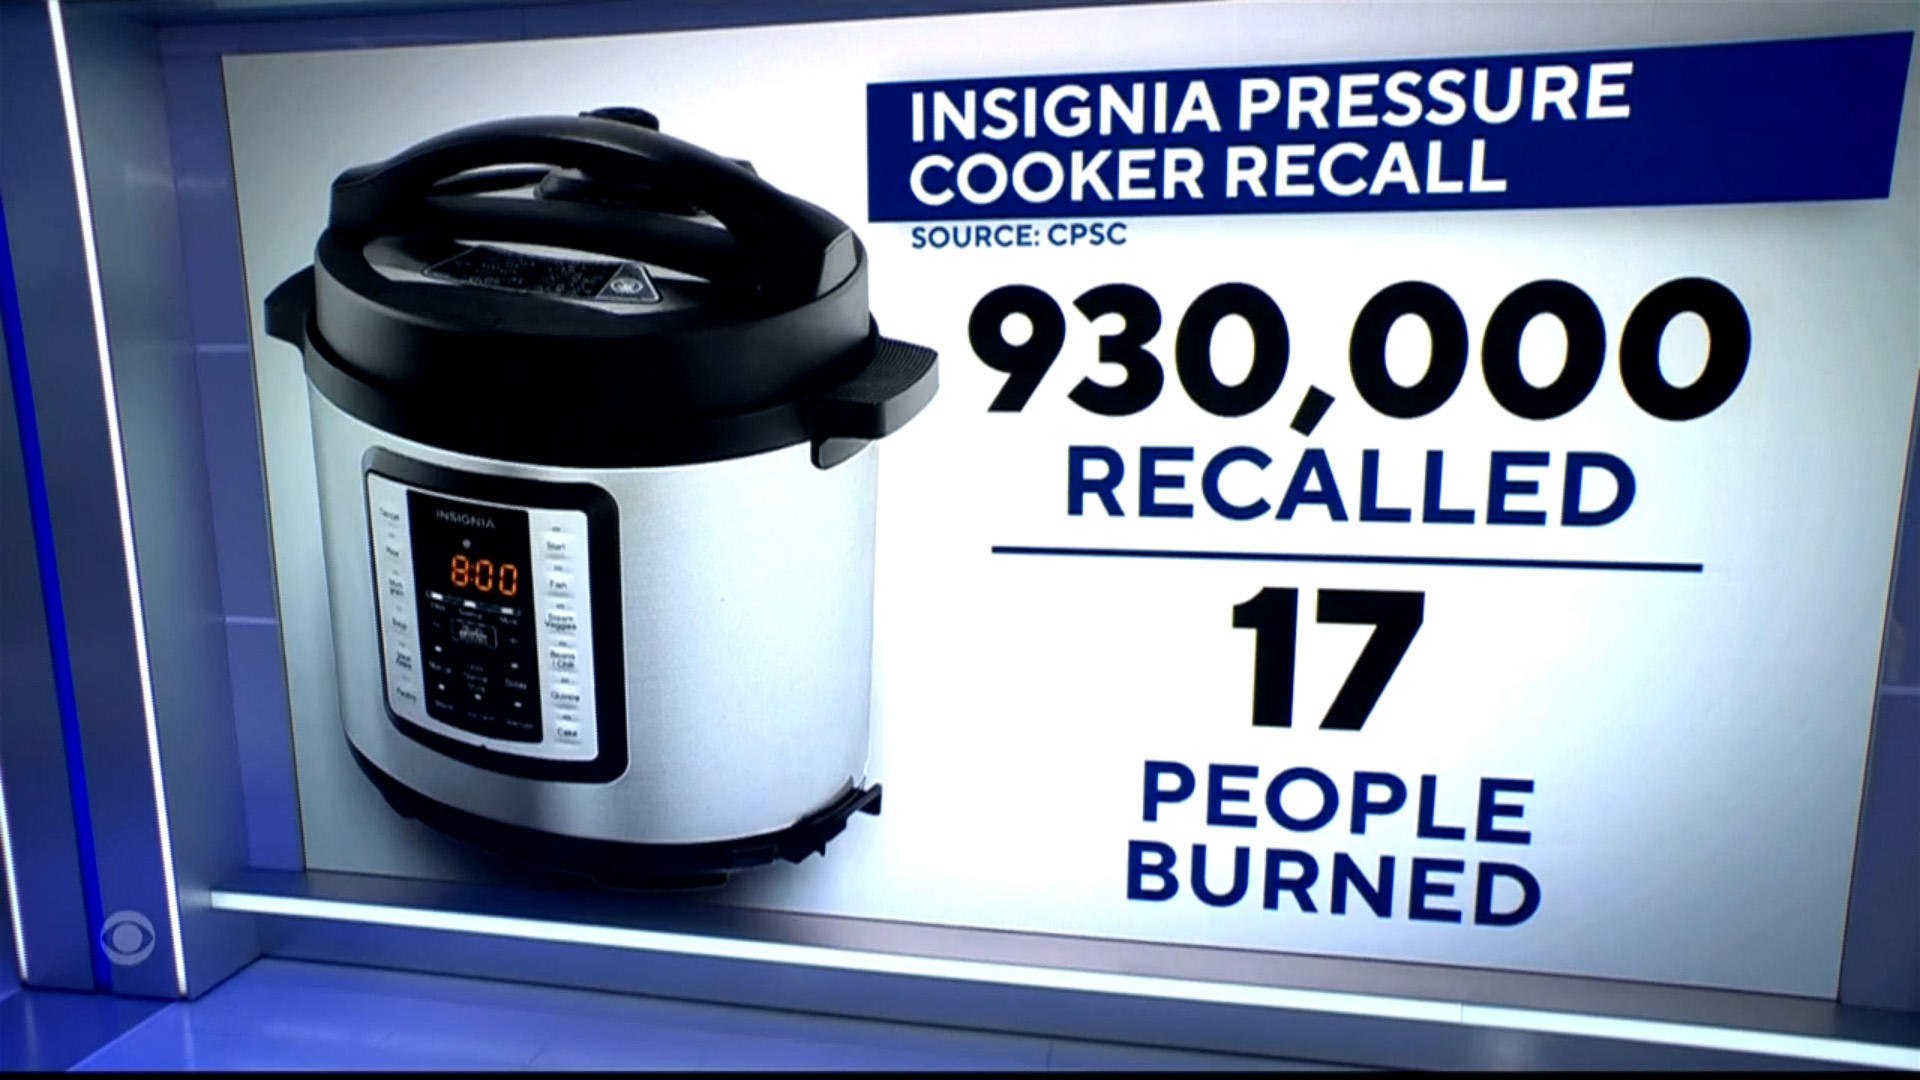 Watch CBS Evening News: Nearly 1 million pressure cookers